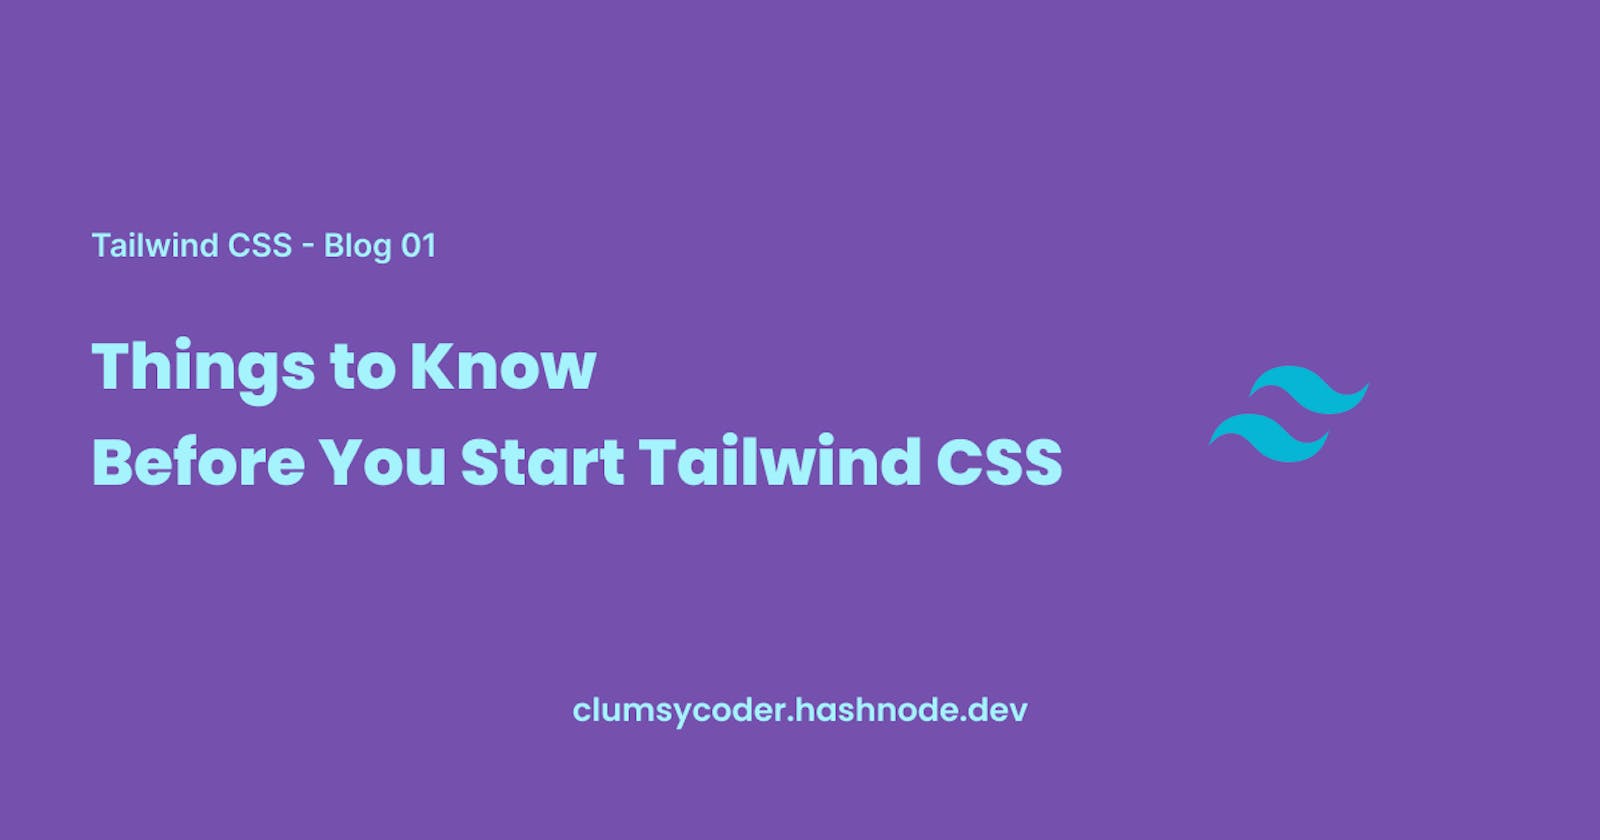 Things to Know Before You Start Tailwind CSS